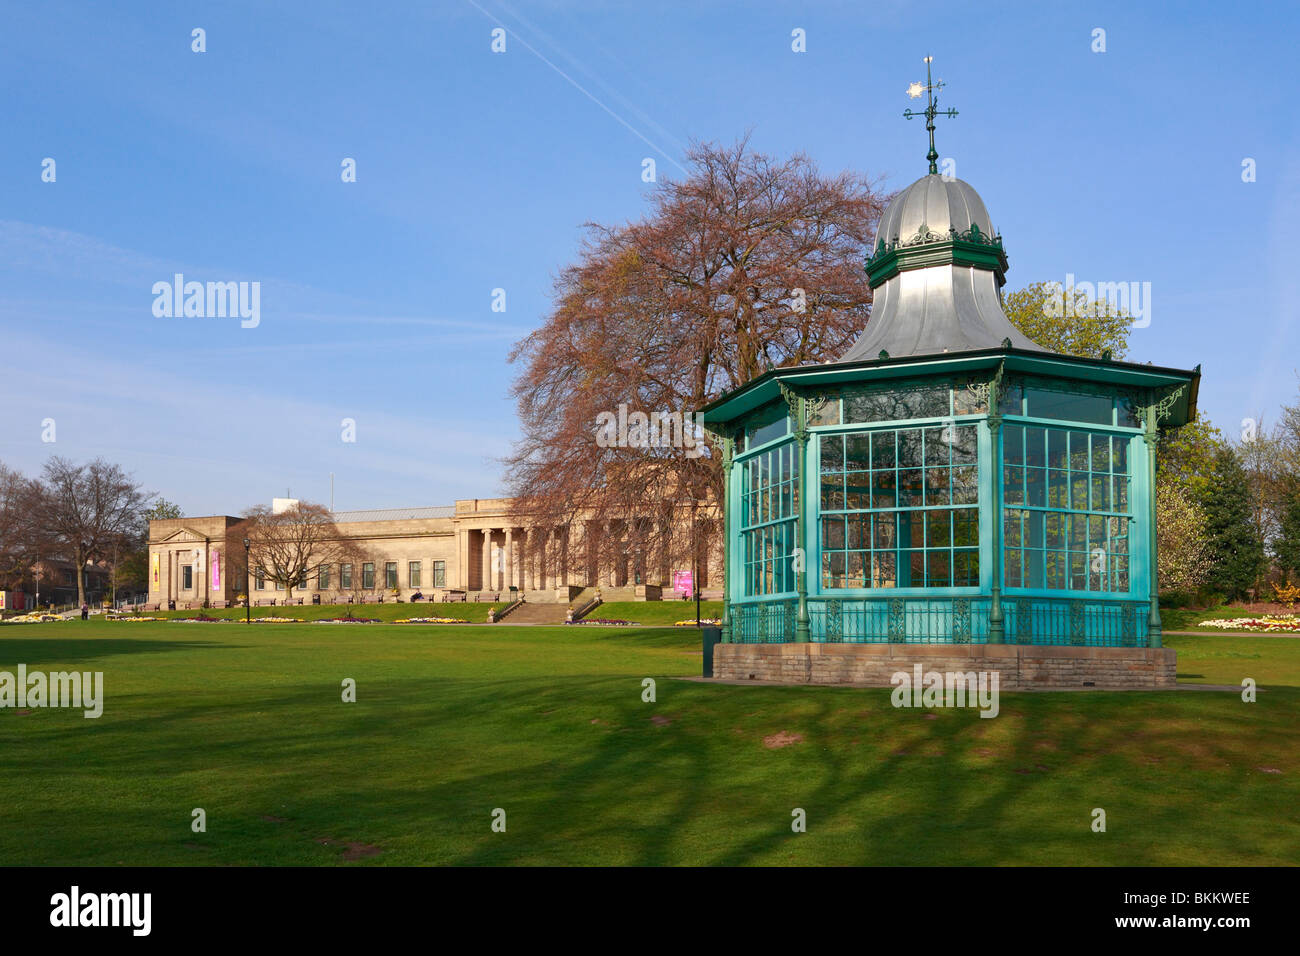 Weston Park Museum and Bandstand, Weston Park, Sheffield, South Yorkshire, England, UK. Stock Photo